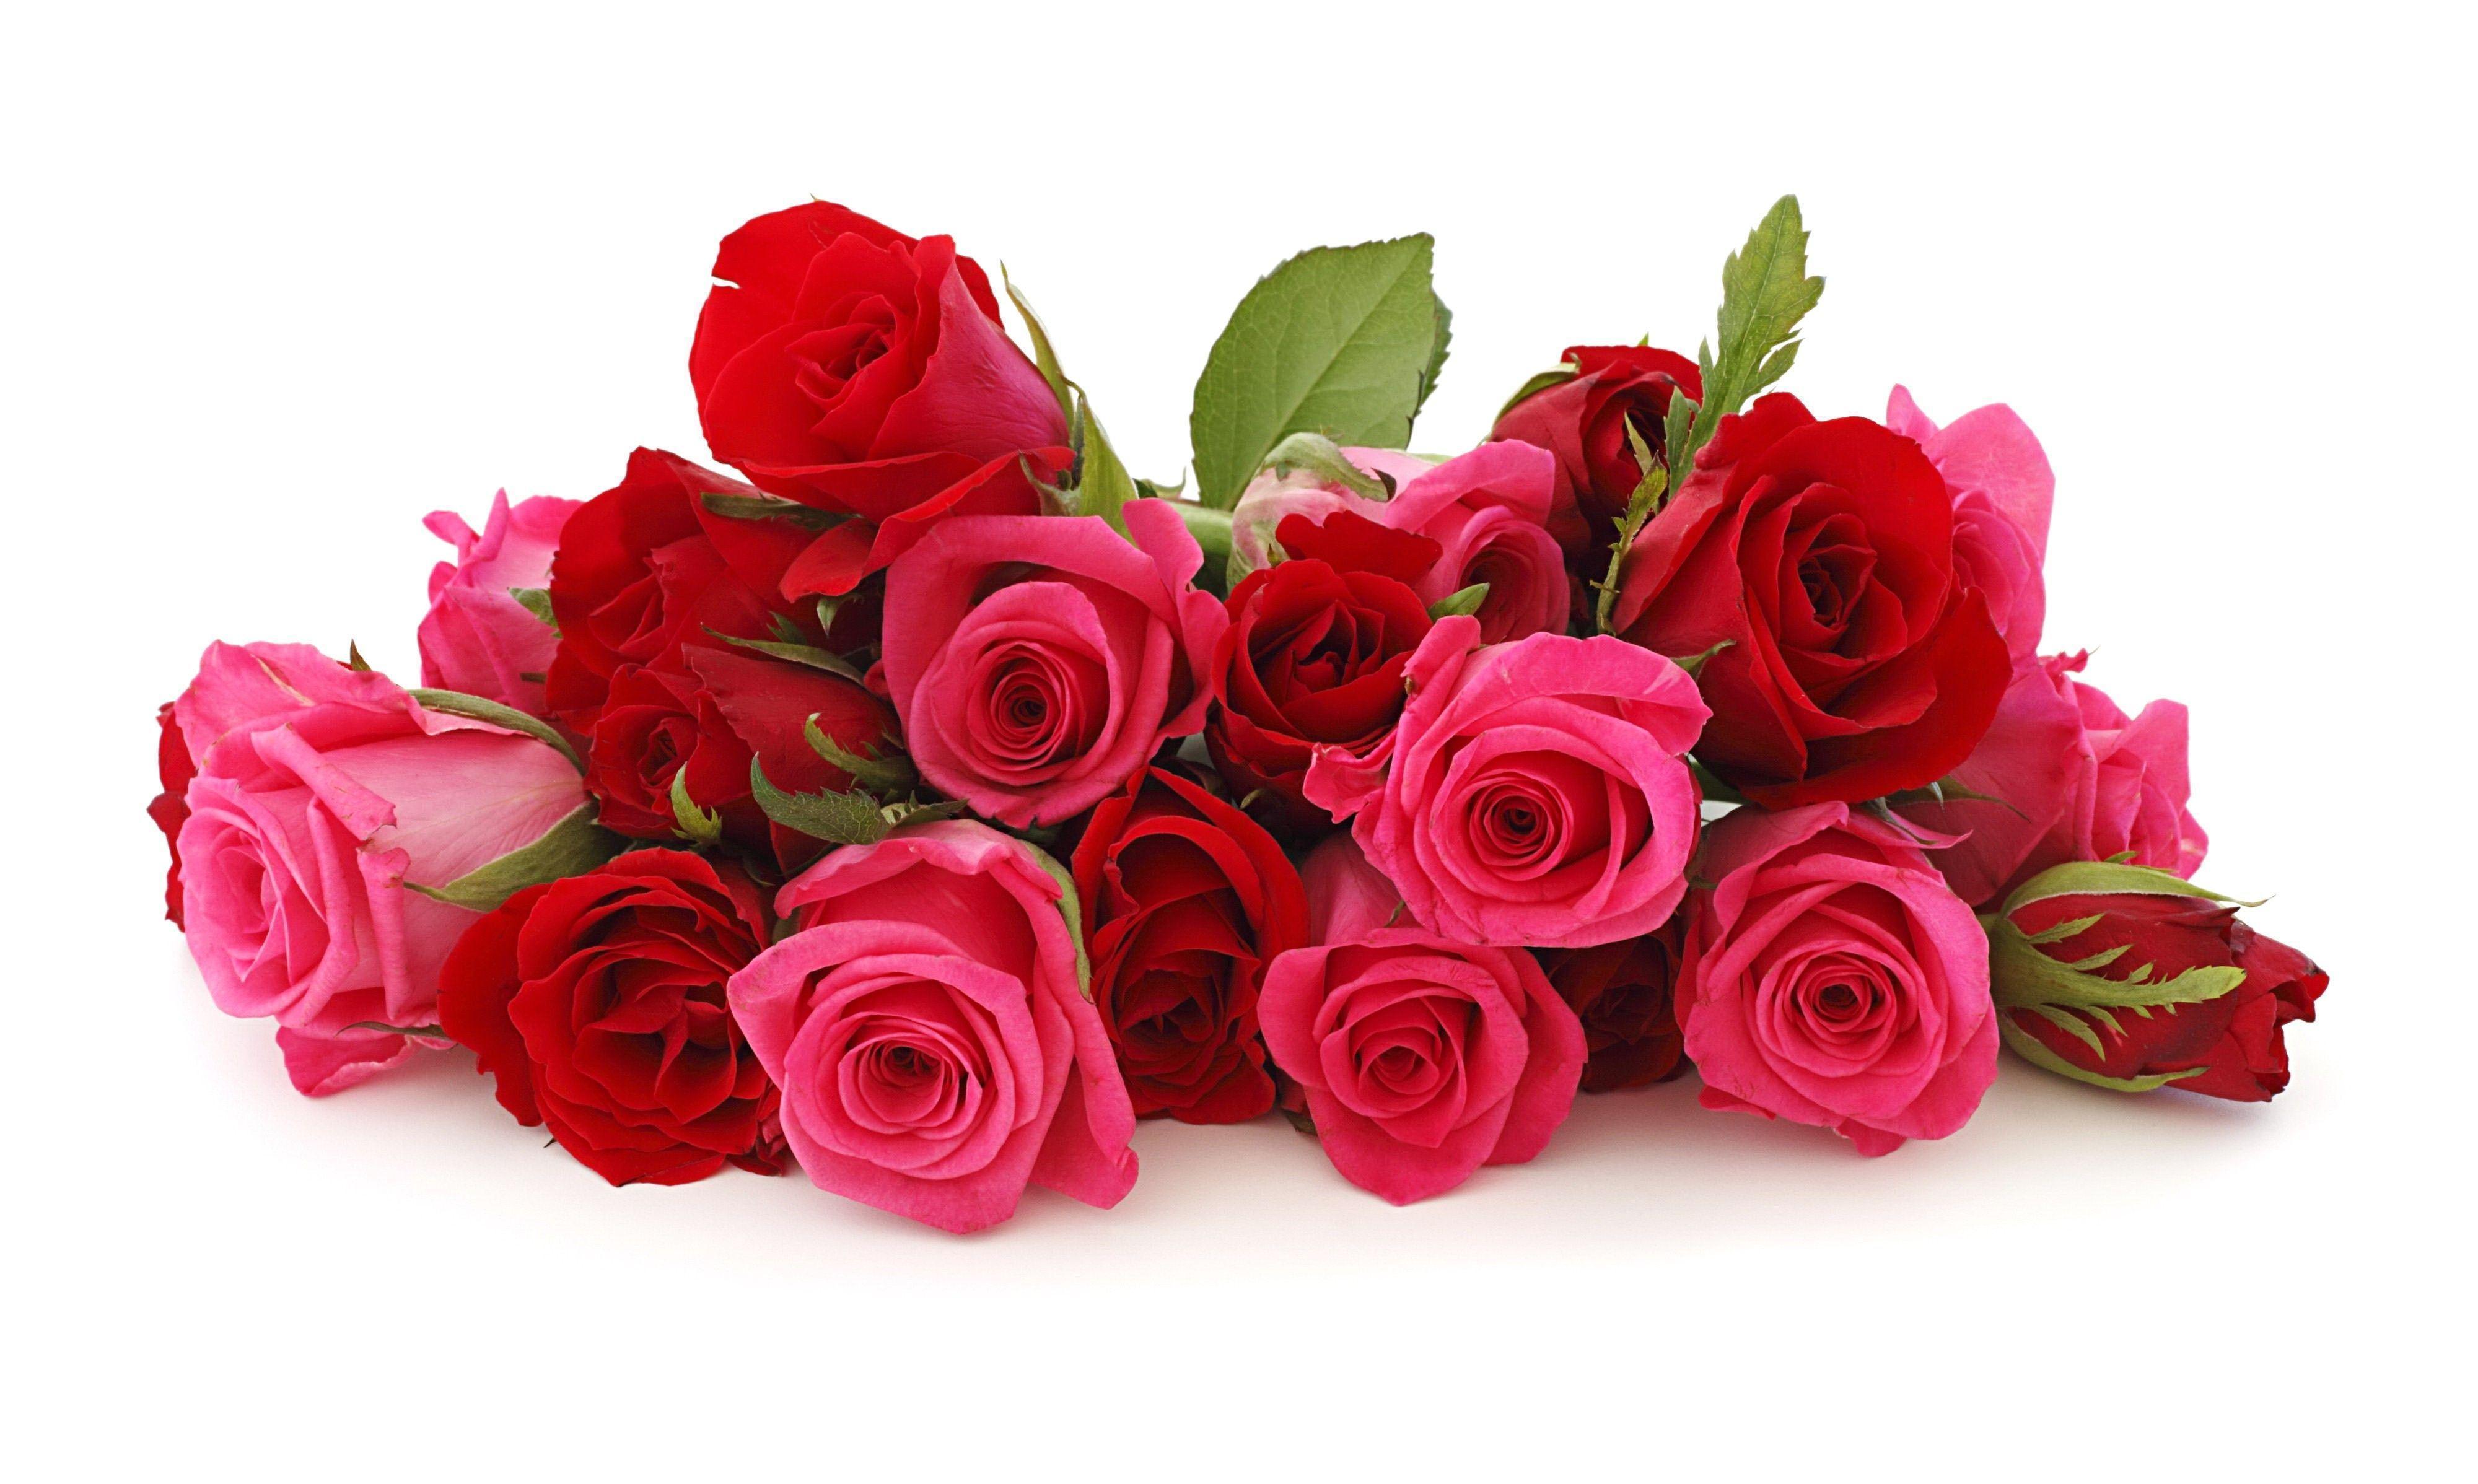 Red Rose & Pink Rose Flowers Bouquet HD Wallpaper